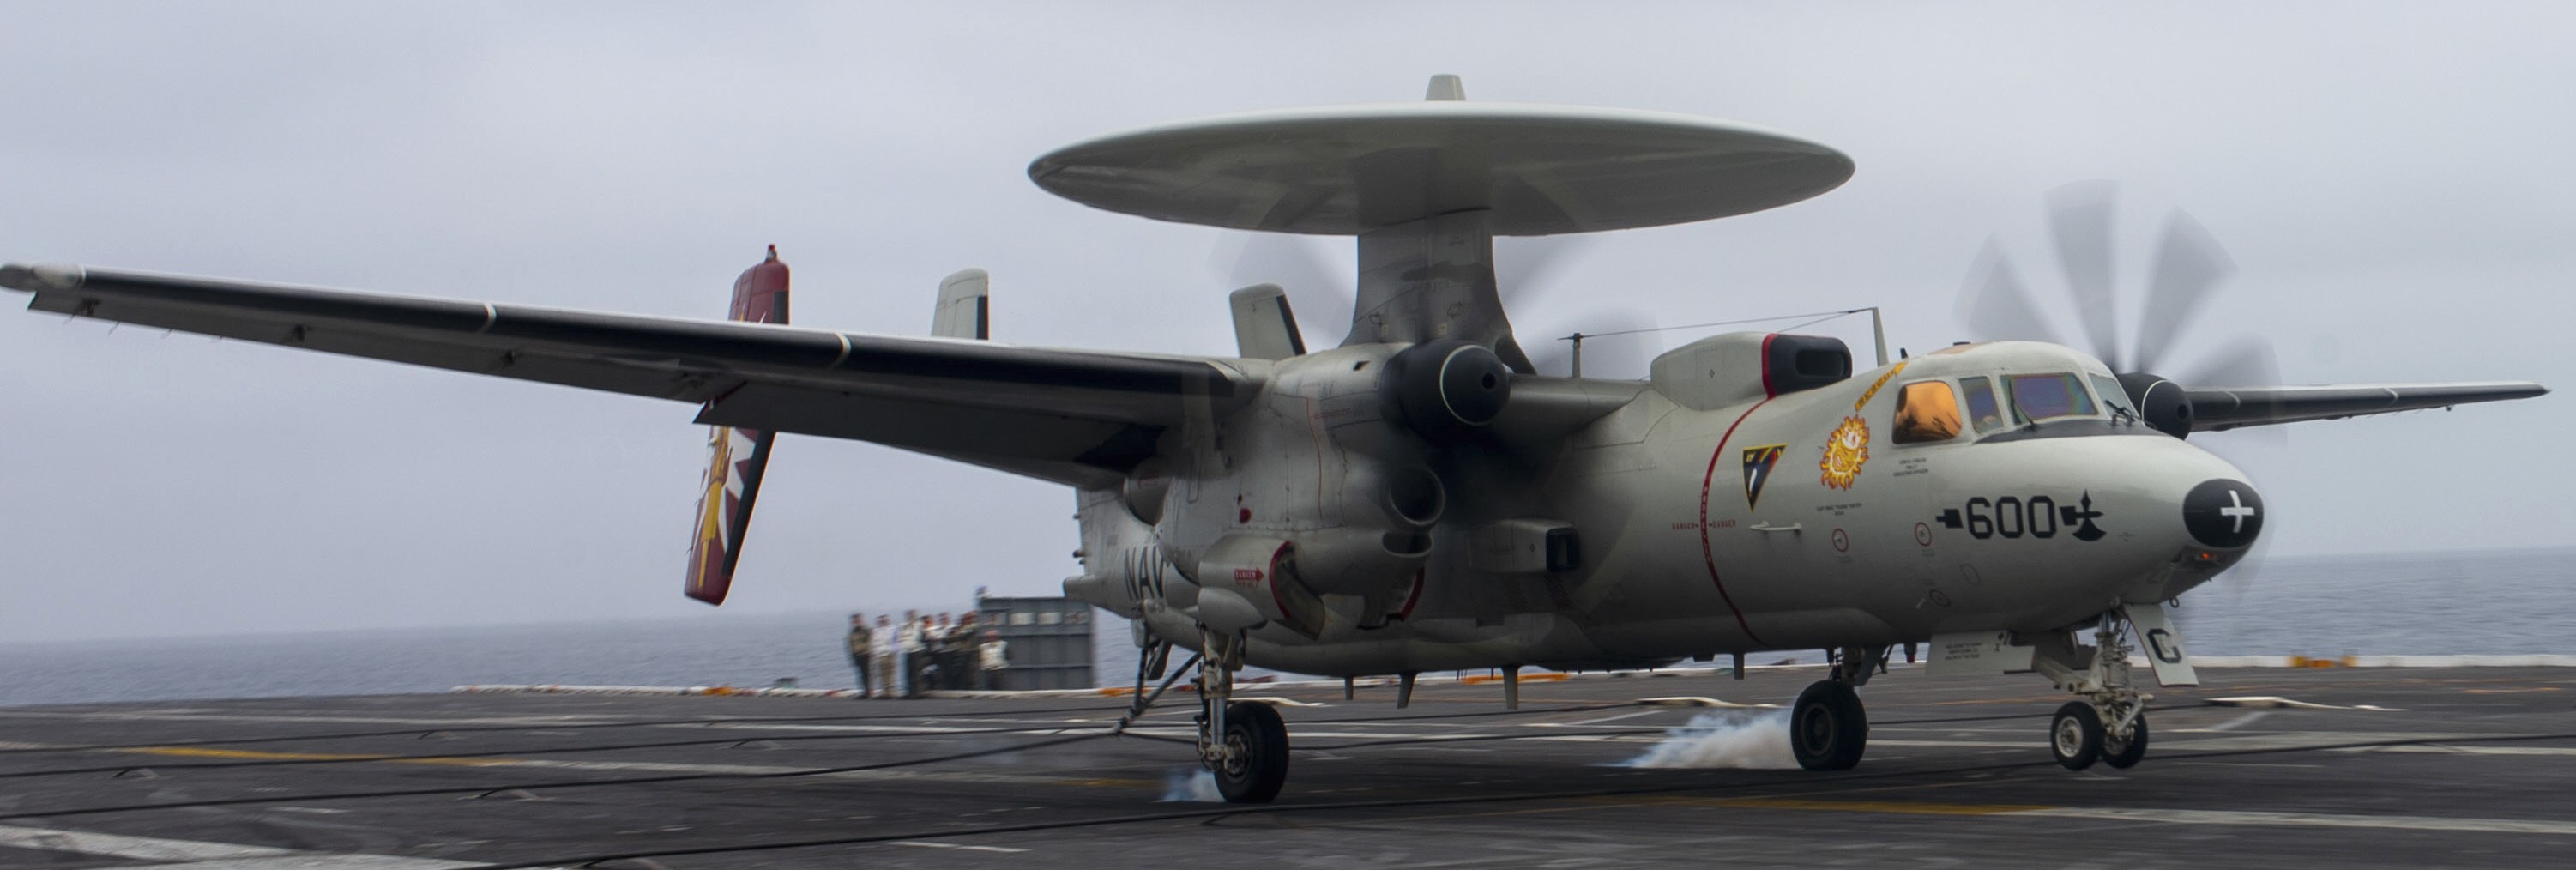 vaw-116 sun kings airborne command control squadron carrier early warning cvw-17 uss nimitz cvn-68 113